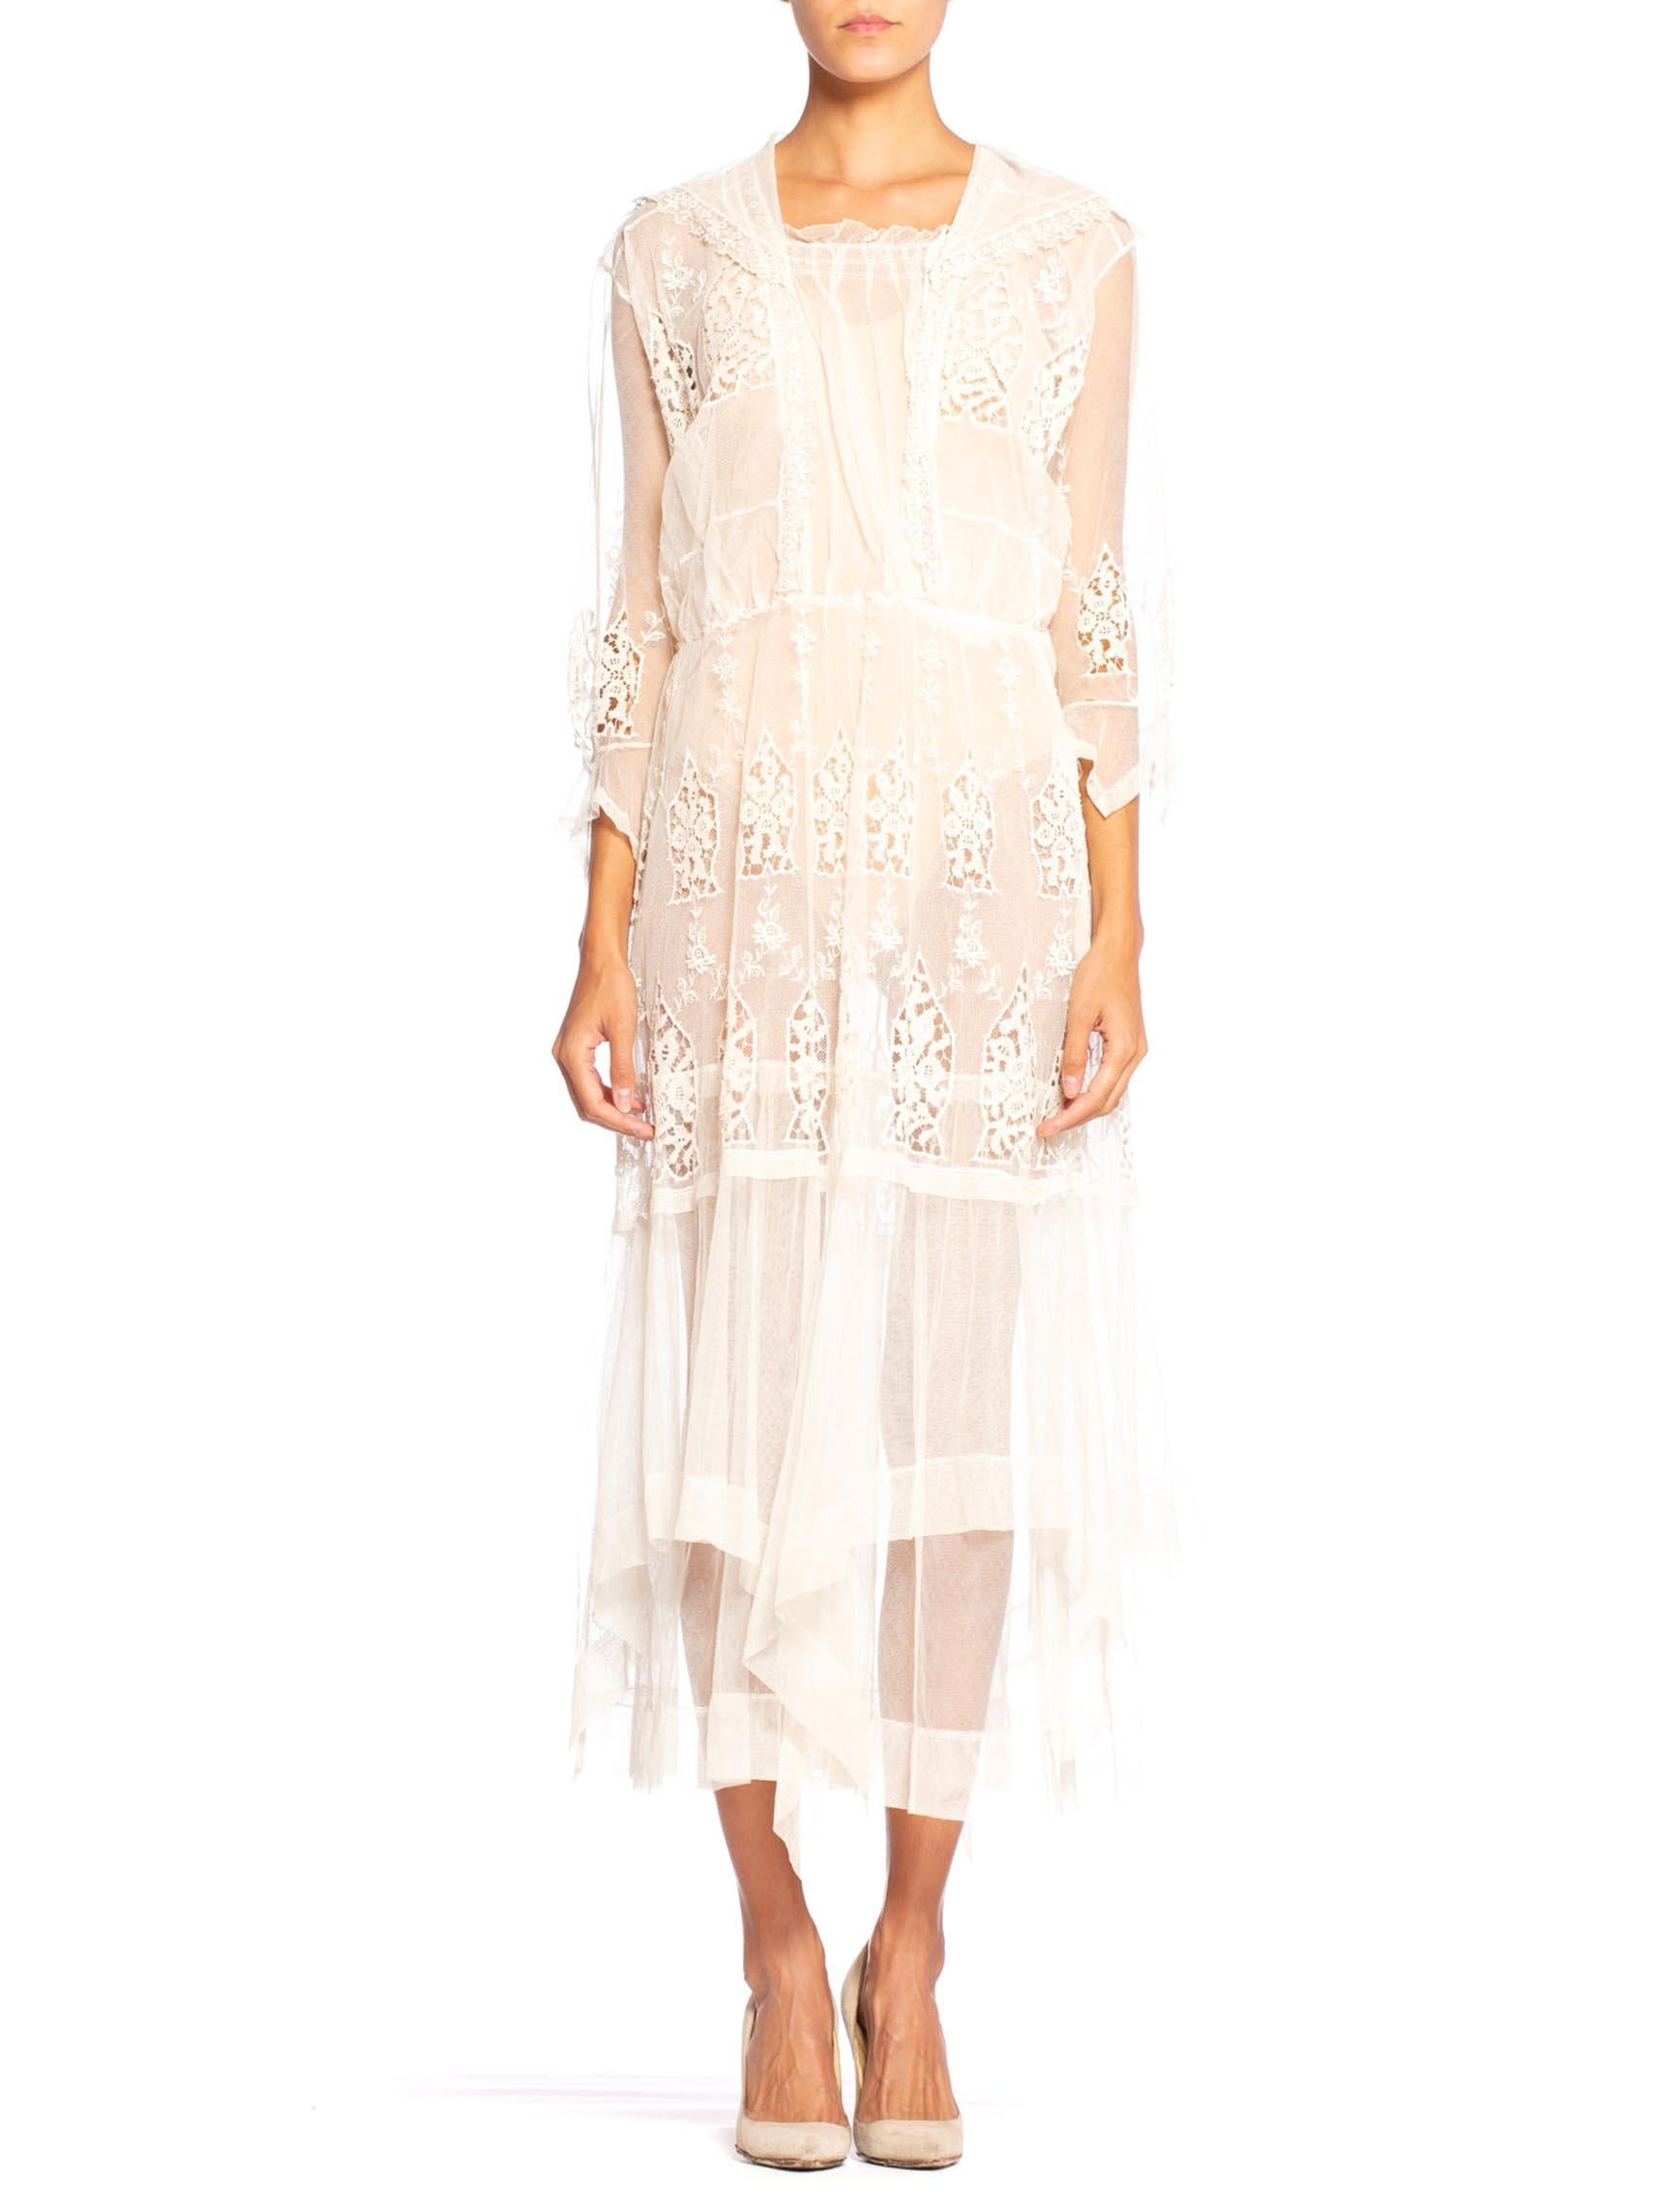 White Edwardian Cream Organic Cotton Embroidered Tulle & Lace Dress With Sheer Sleeves